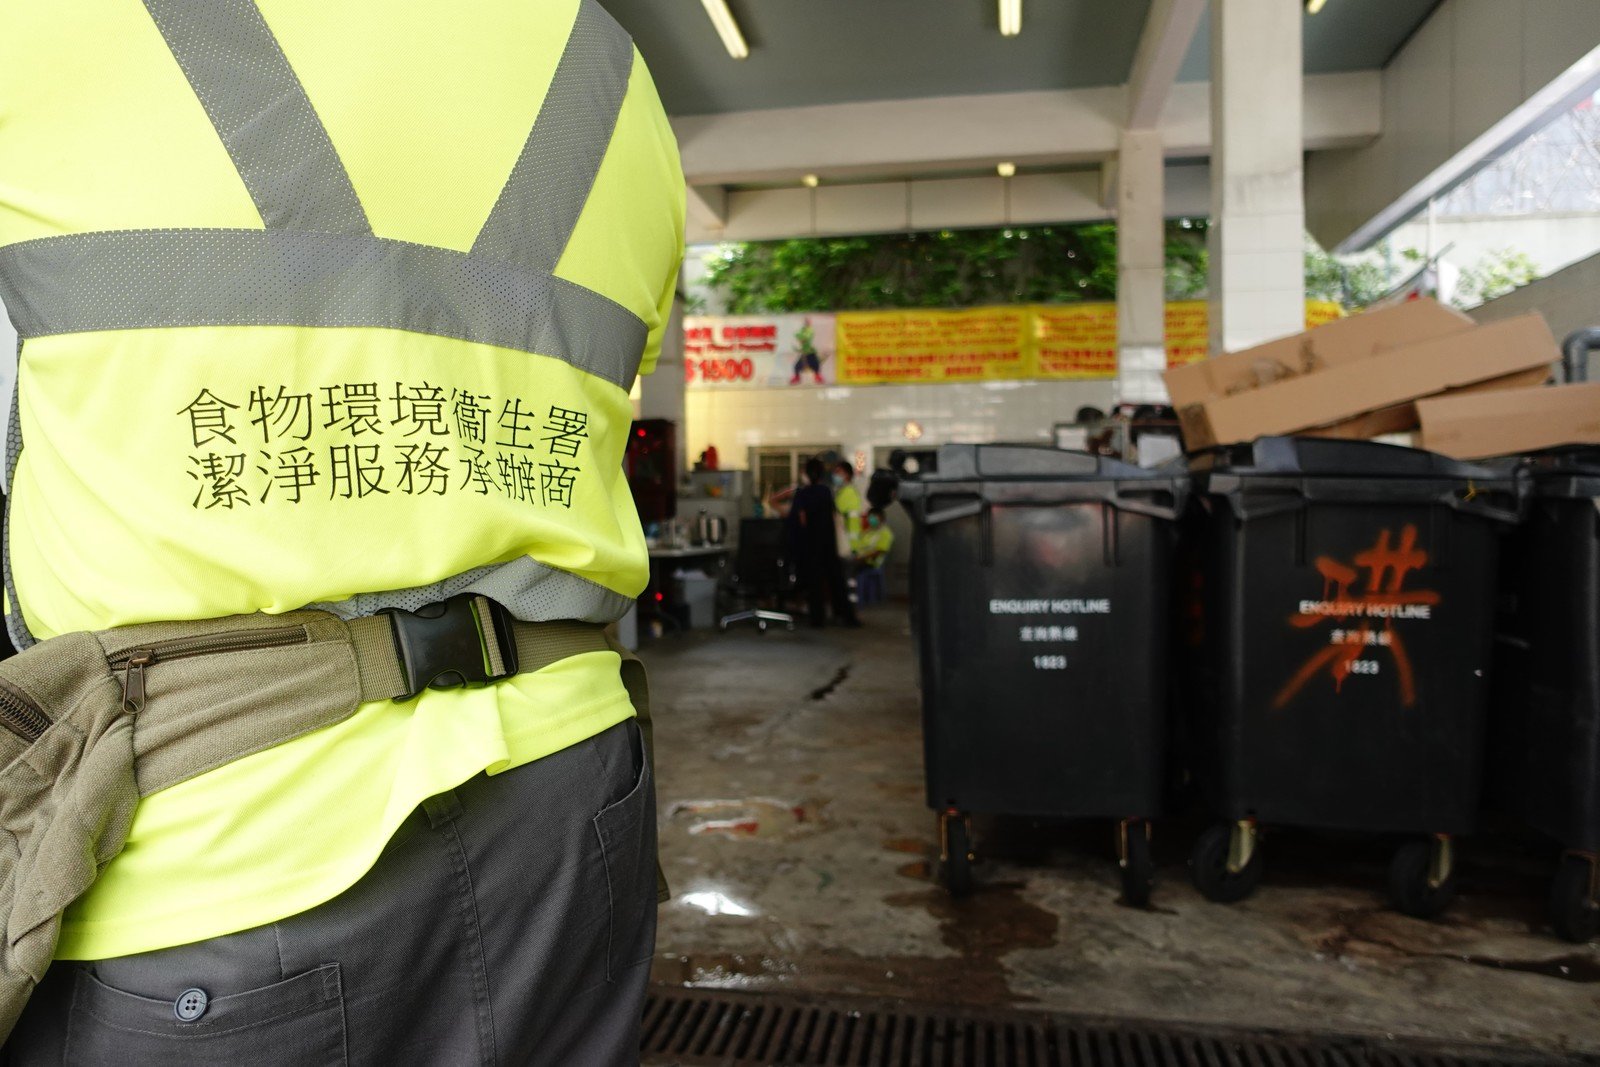 Oxfam Hong Kong believes it is necessary to separate working and resting areas, and urges the government to establish clear and objective guidelines on when work needs to cease in extreme heat in order to protect workers’ health. 